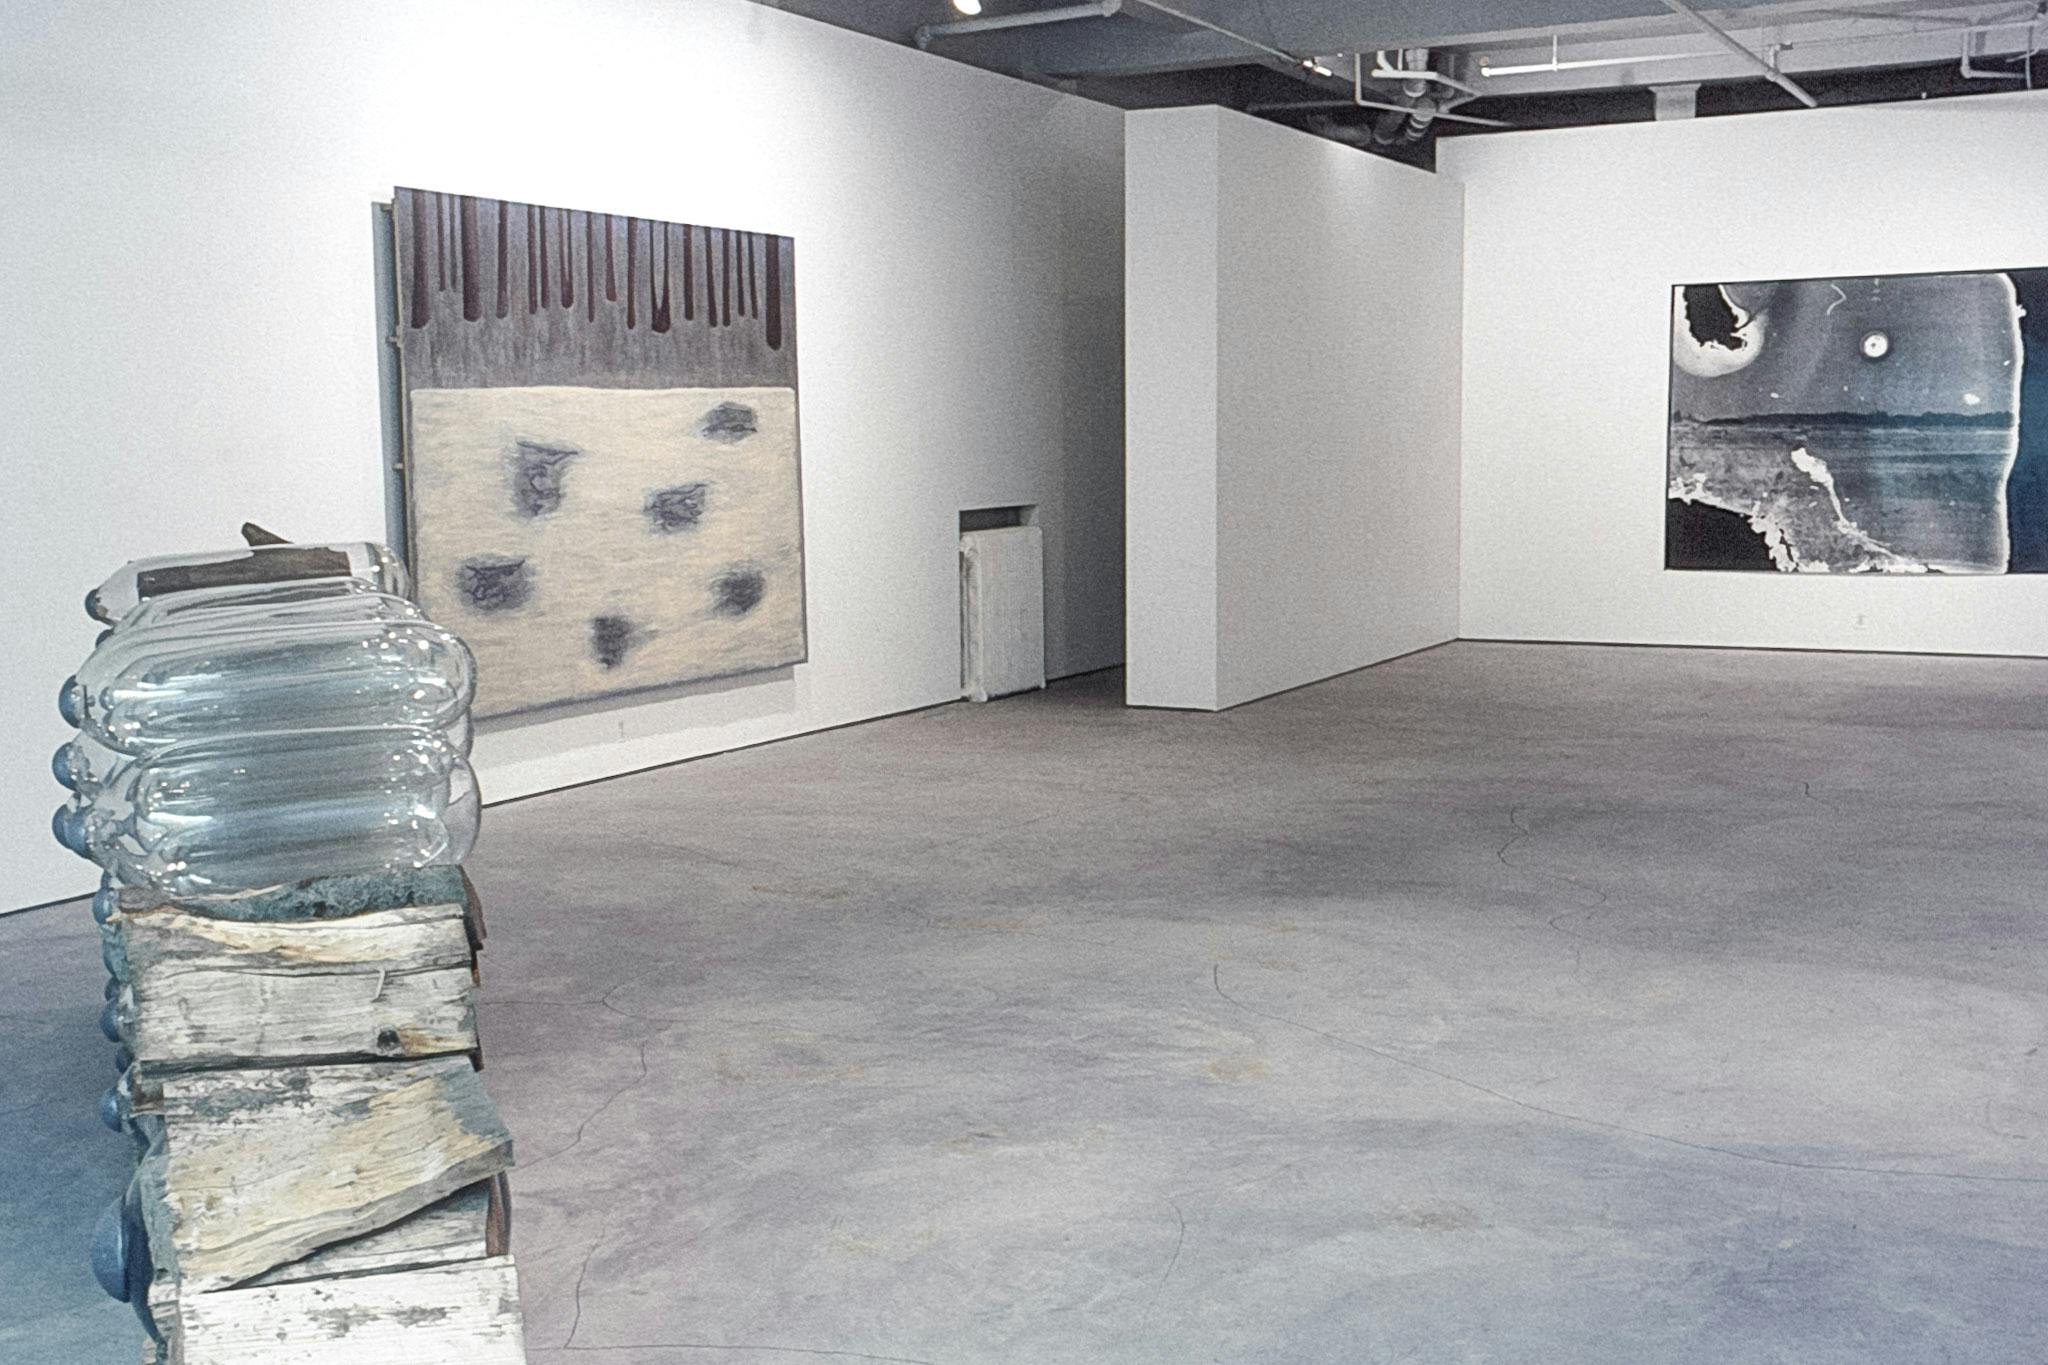 A room in a gallery shows 3 artworks. One is a thin stack of firewood and glass cylinders. One is an abstract yellow, grey and black painting, The other is a large, deteriorated photo of a landscape.